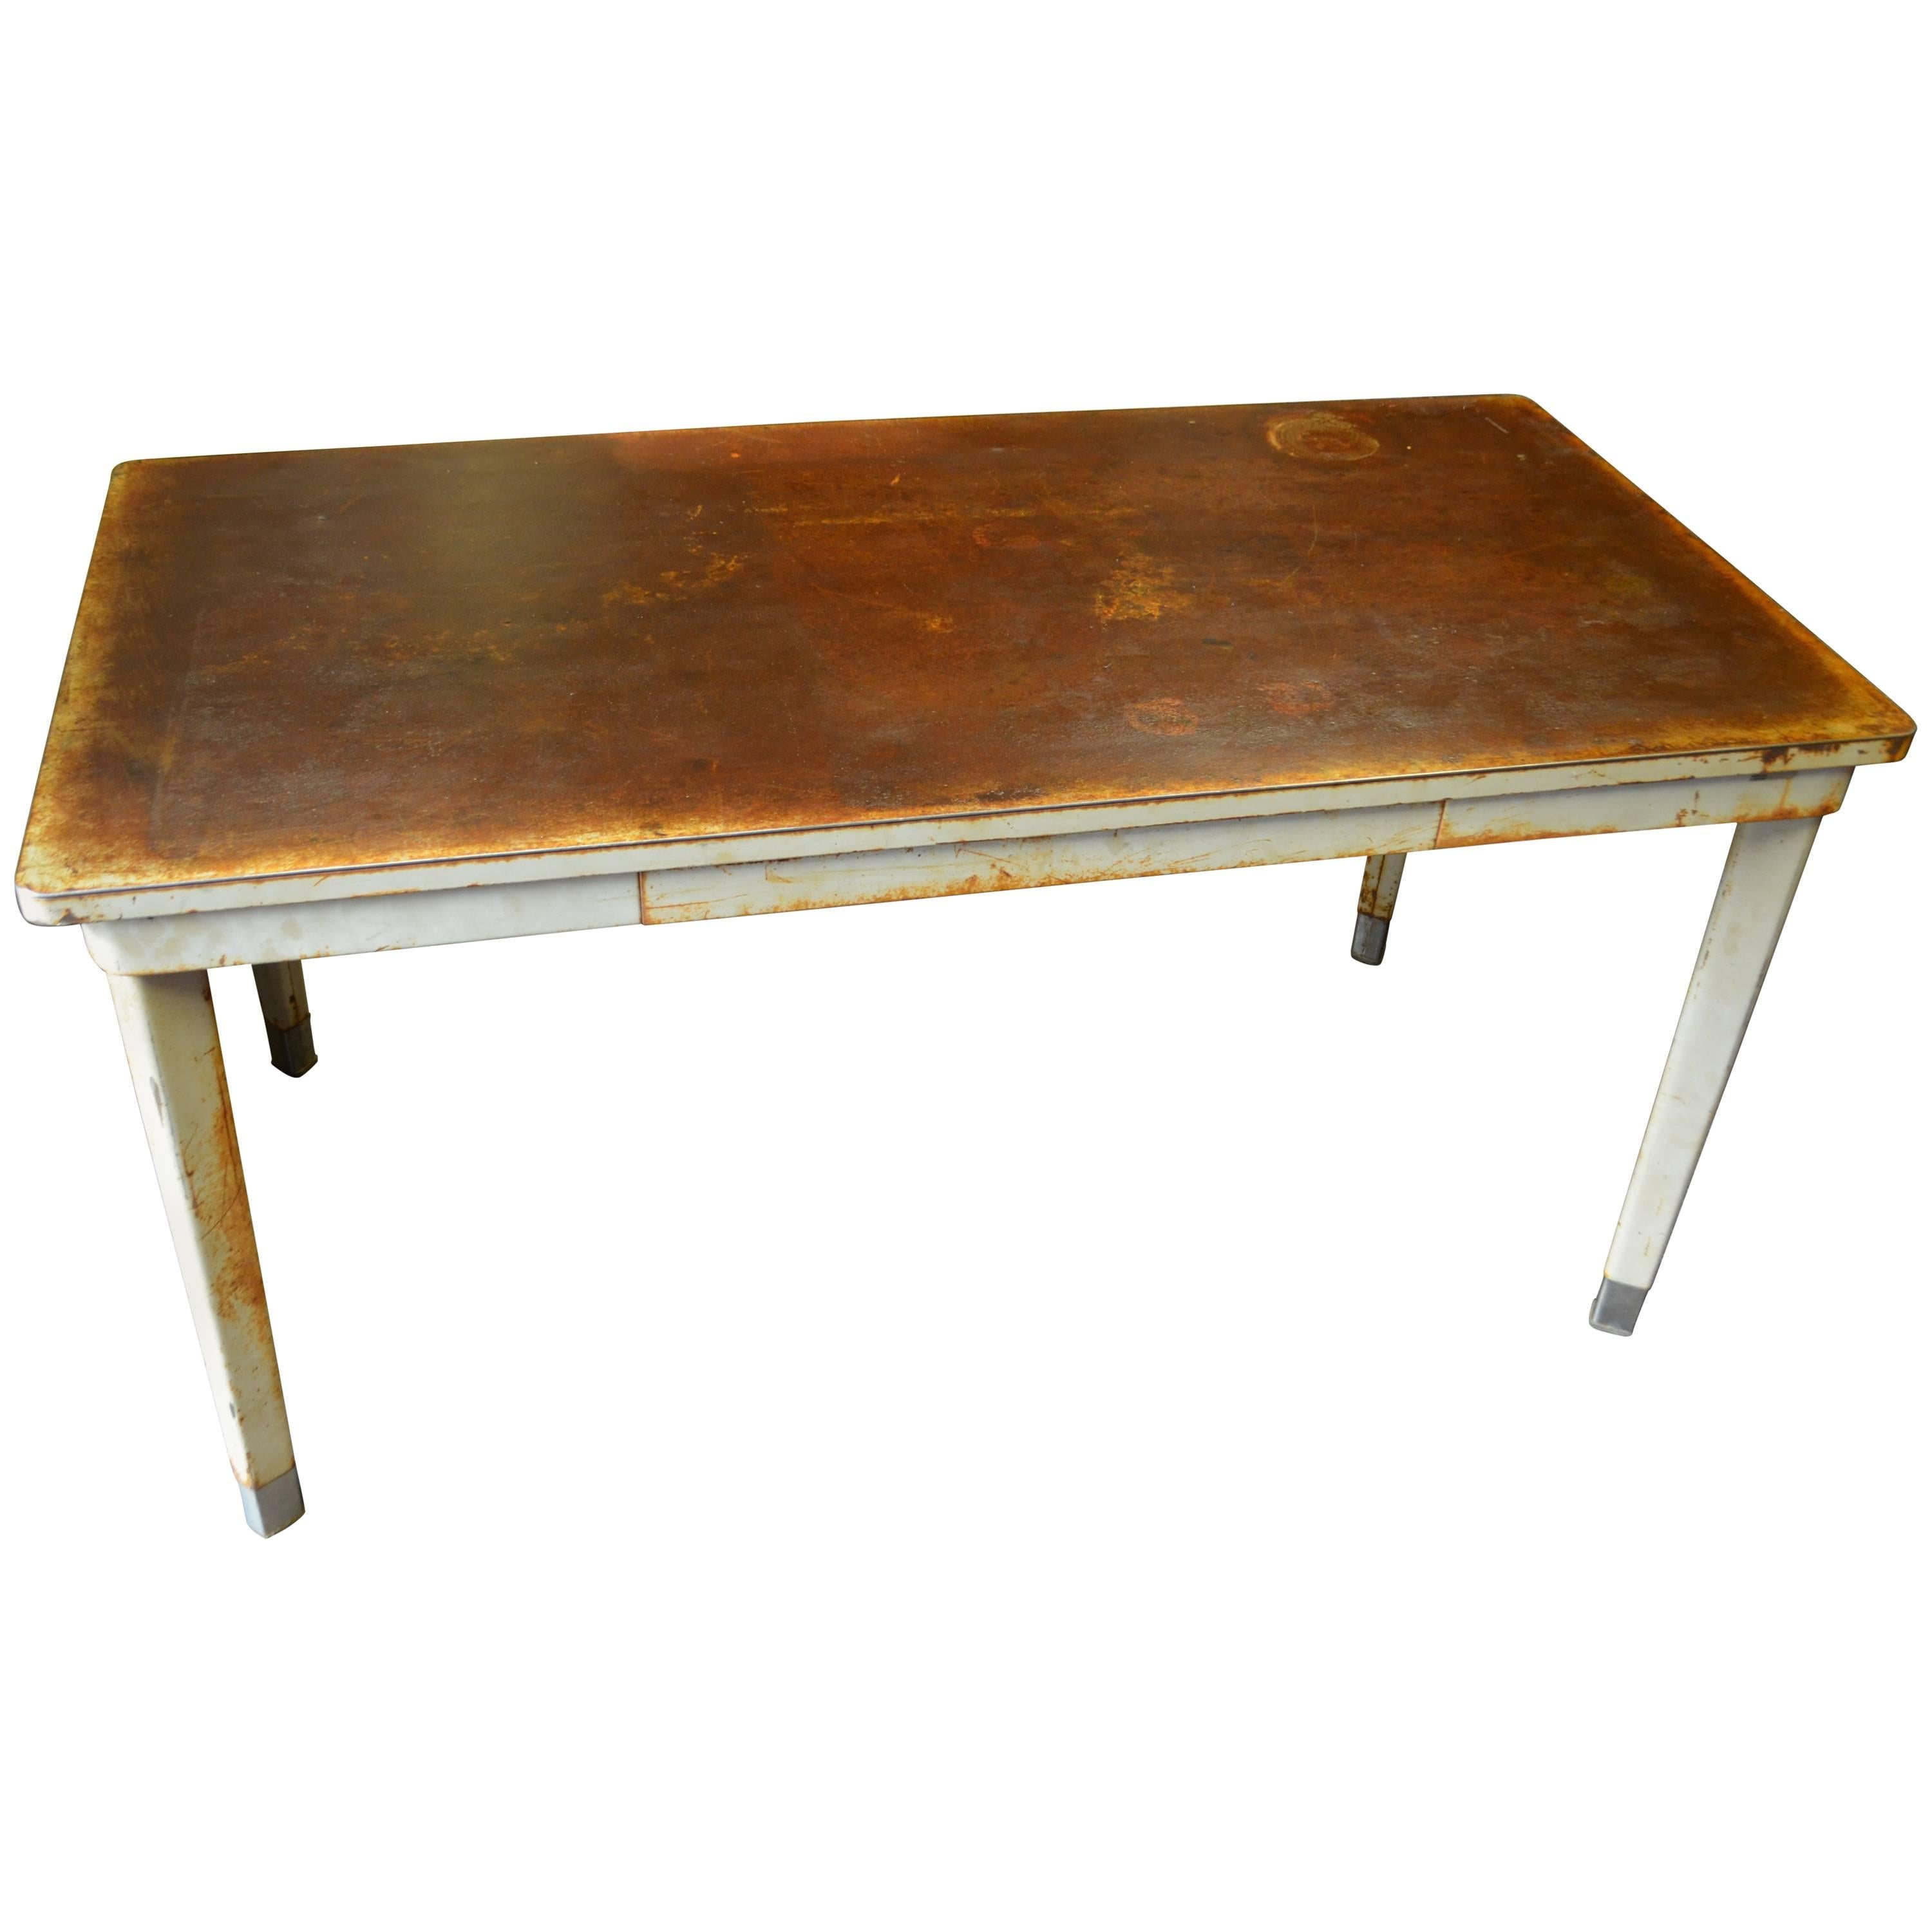 Desk Work Table with Steel Top and Legs, Mid-Century